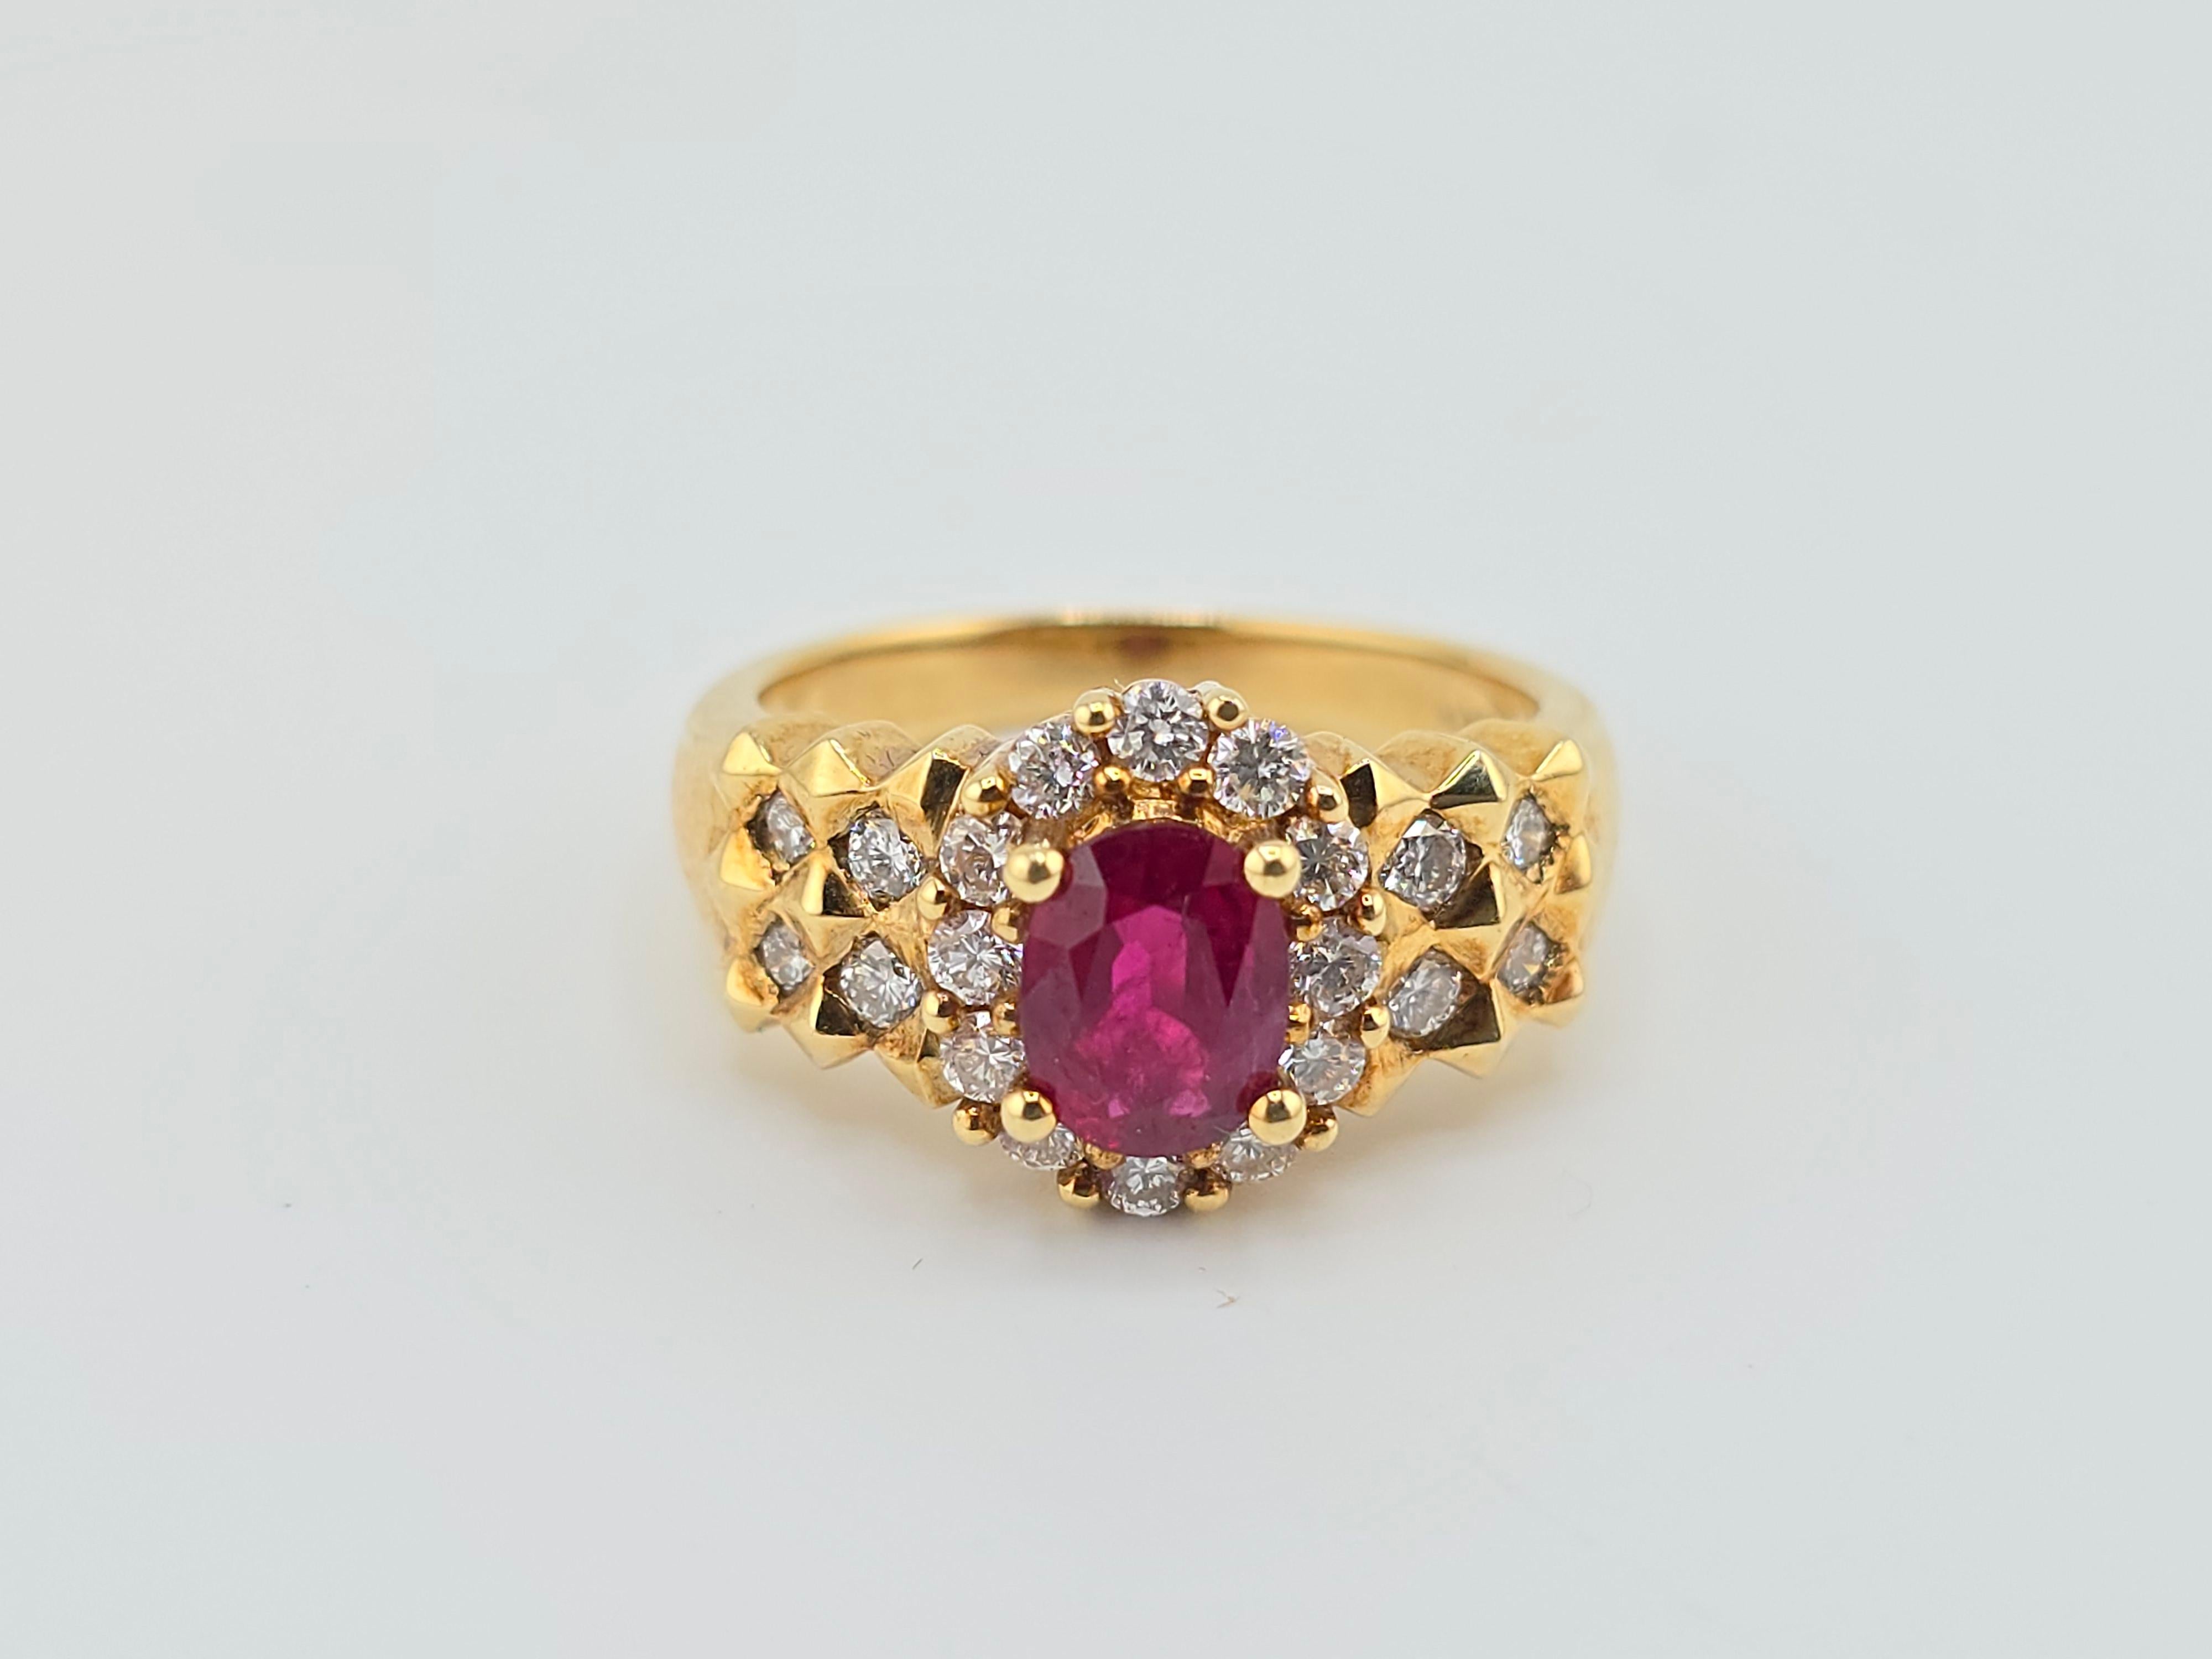 This is a fabulous 18 karat yellow gold ring with super clean diamonds and a gorgeous natural ruby center stone. The quality on the ruby is very exceptional with a nice, deep, rich, red purplish color. And all around the ruby l there are nice round